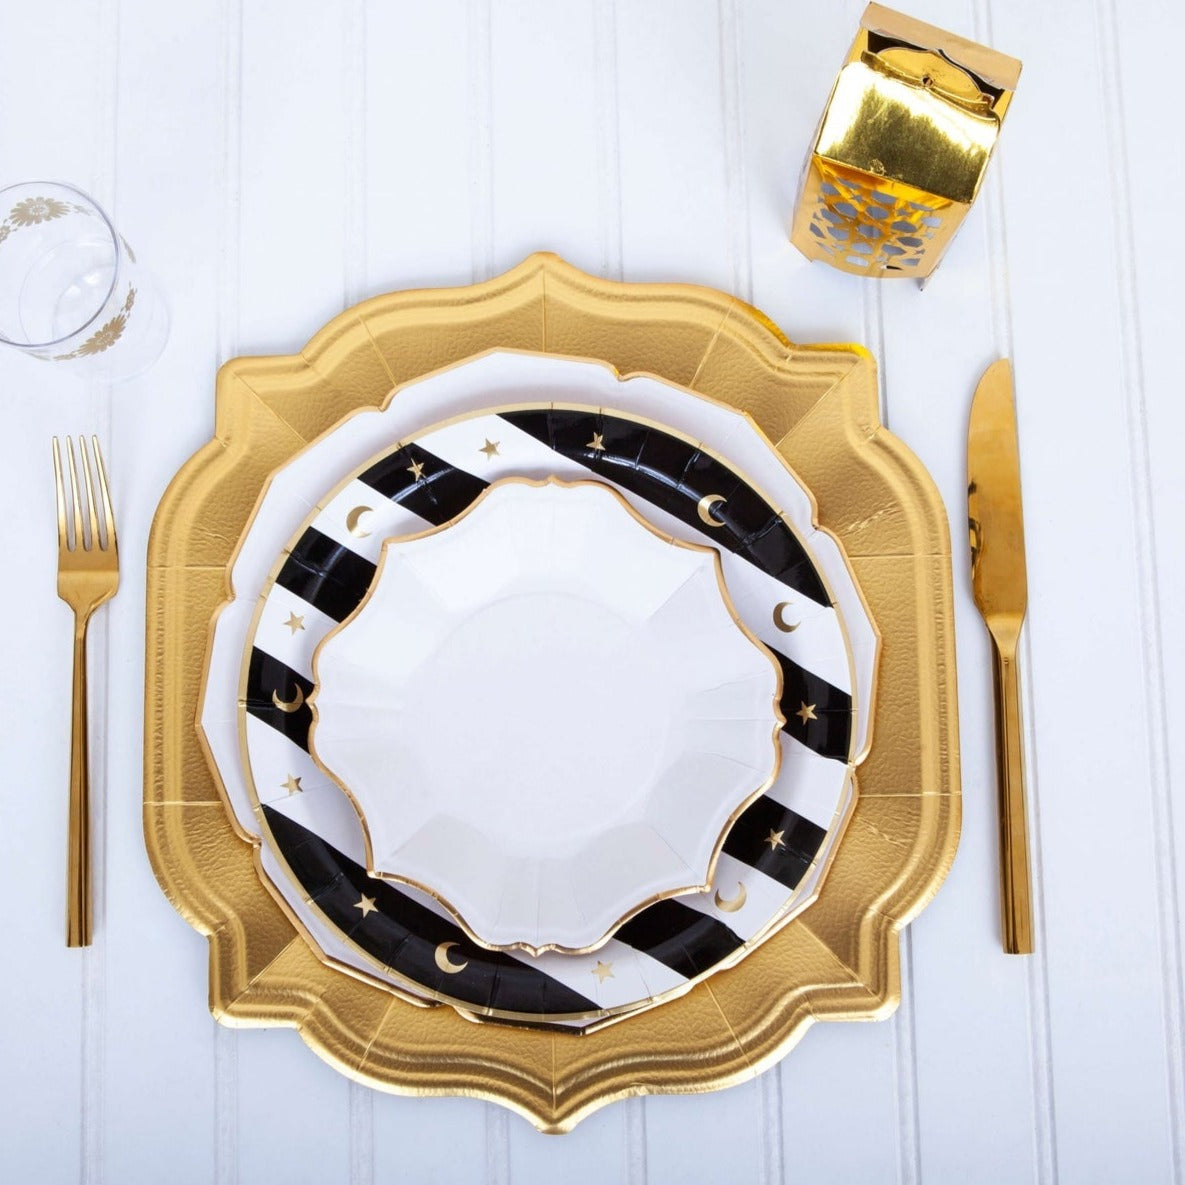 A stunning Christmas table setting adorned with gold and pomegranate accents, featuring elegant Eid Creations White Scalloped Plates with Gold Rim.